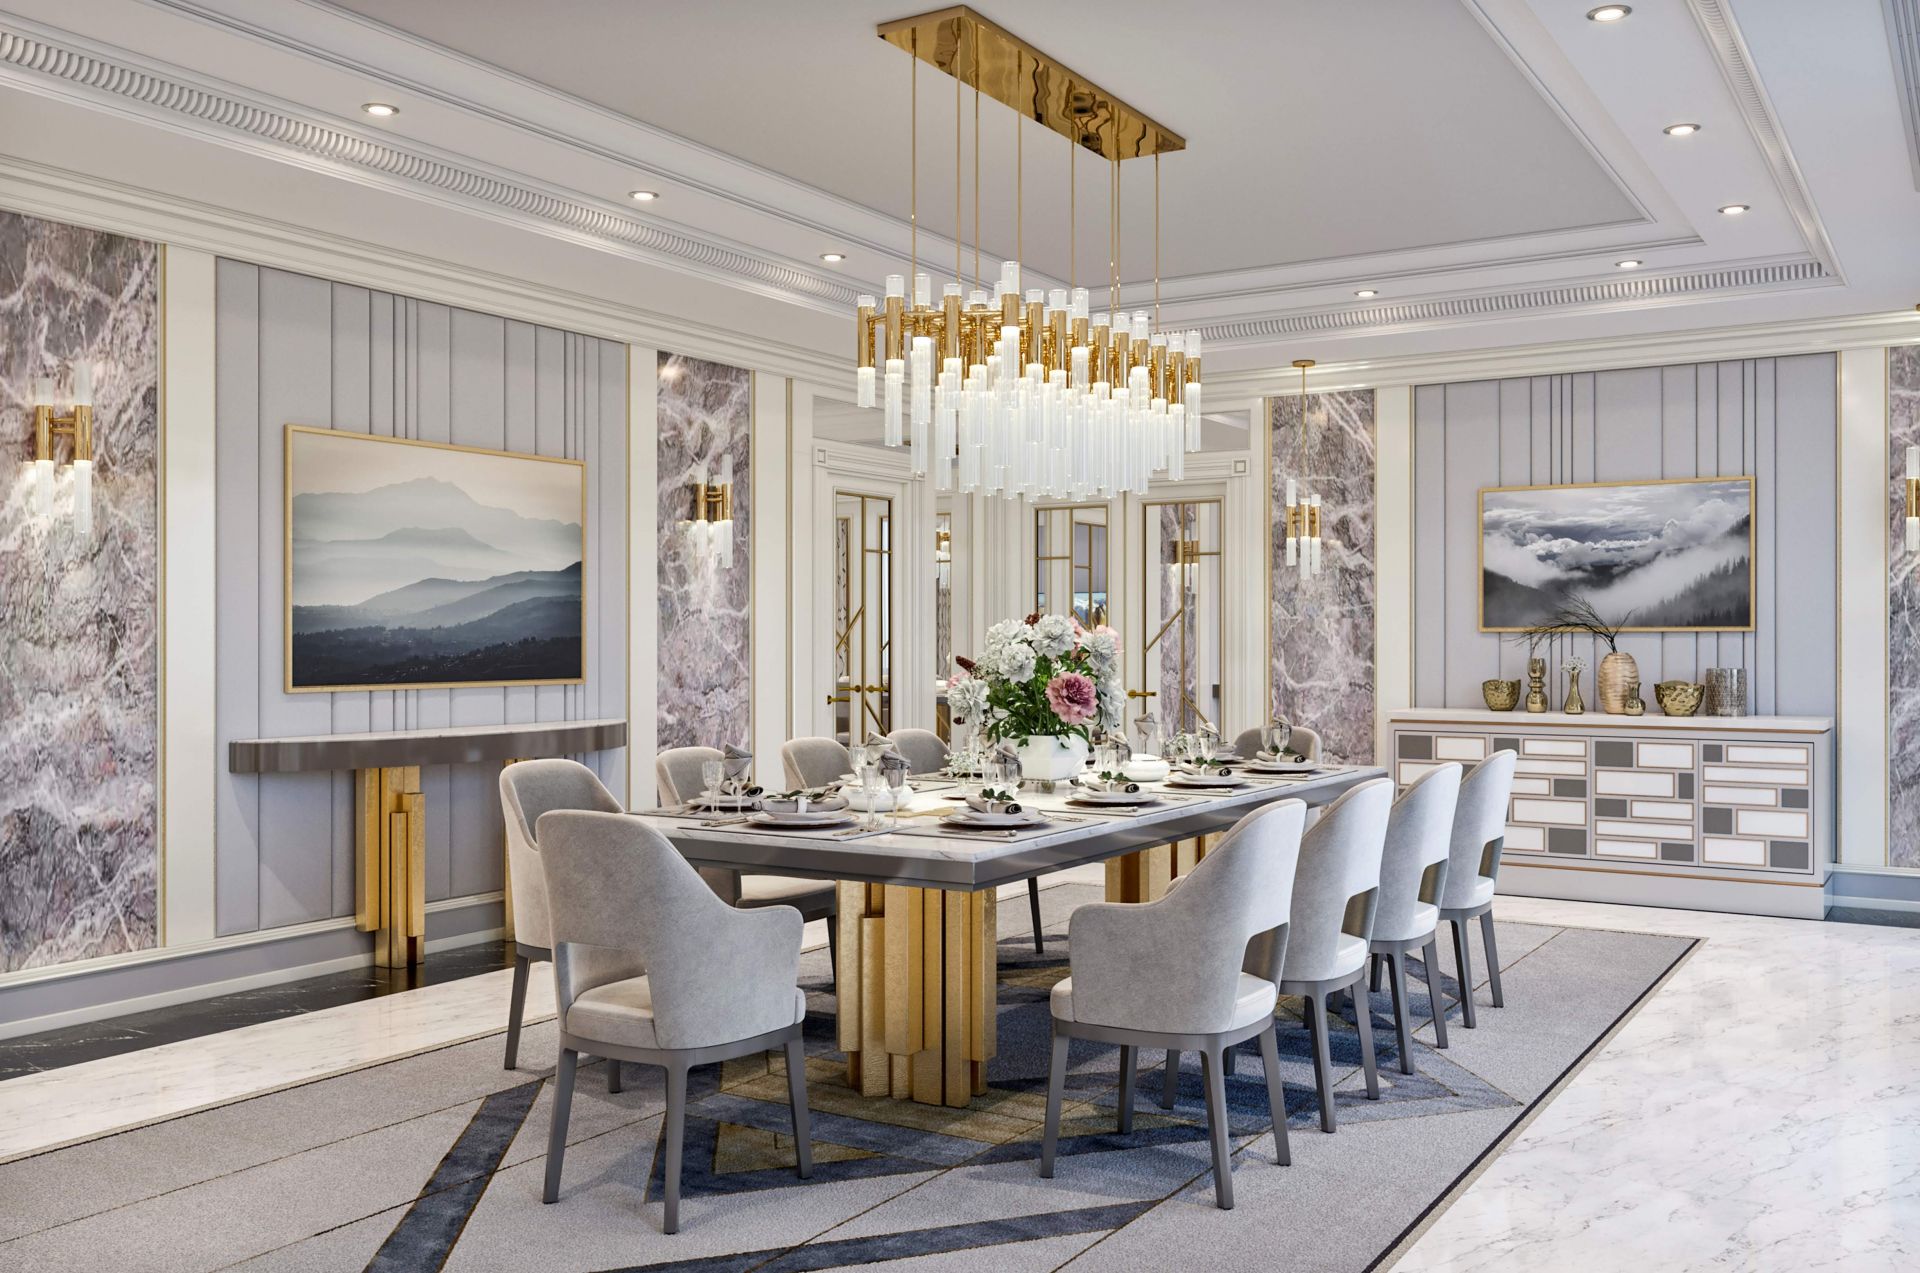 Interior design of the living-dining room in the Hilton Hotel